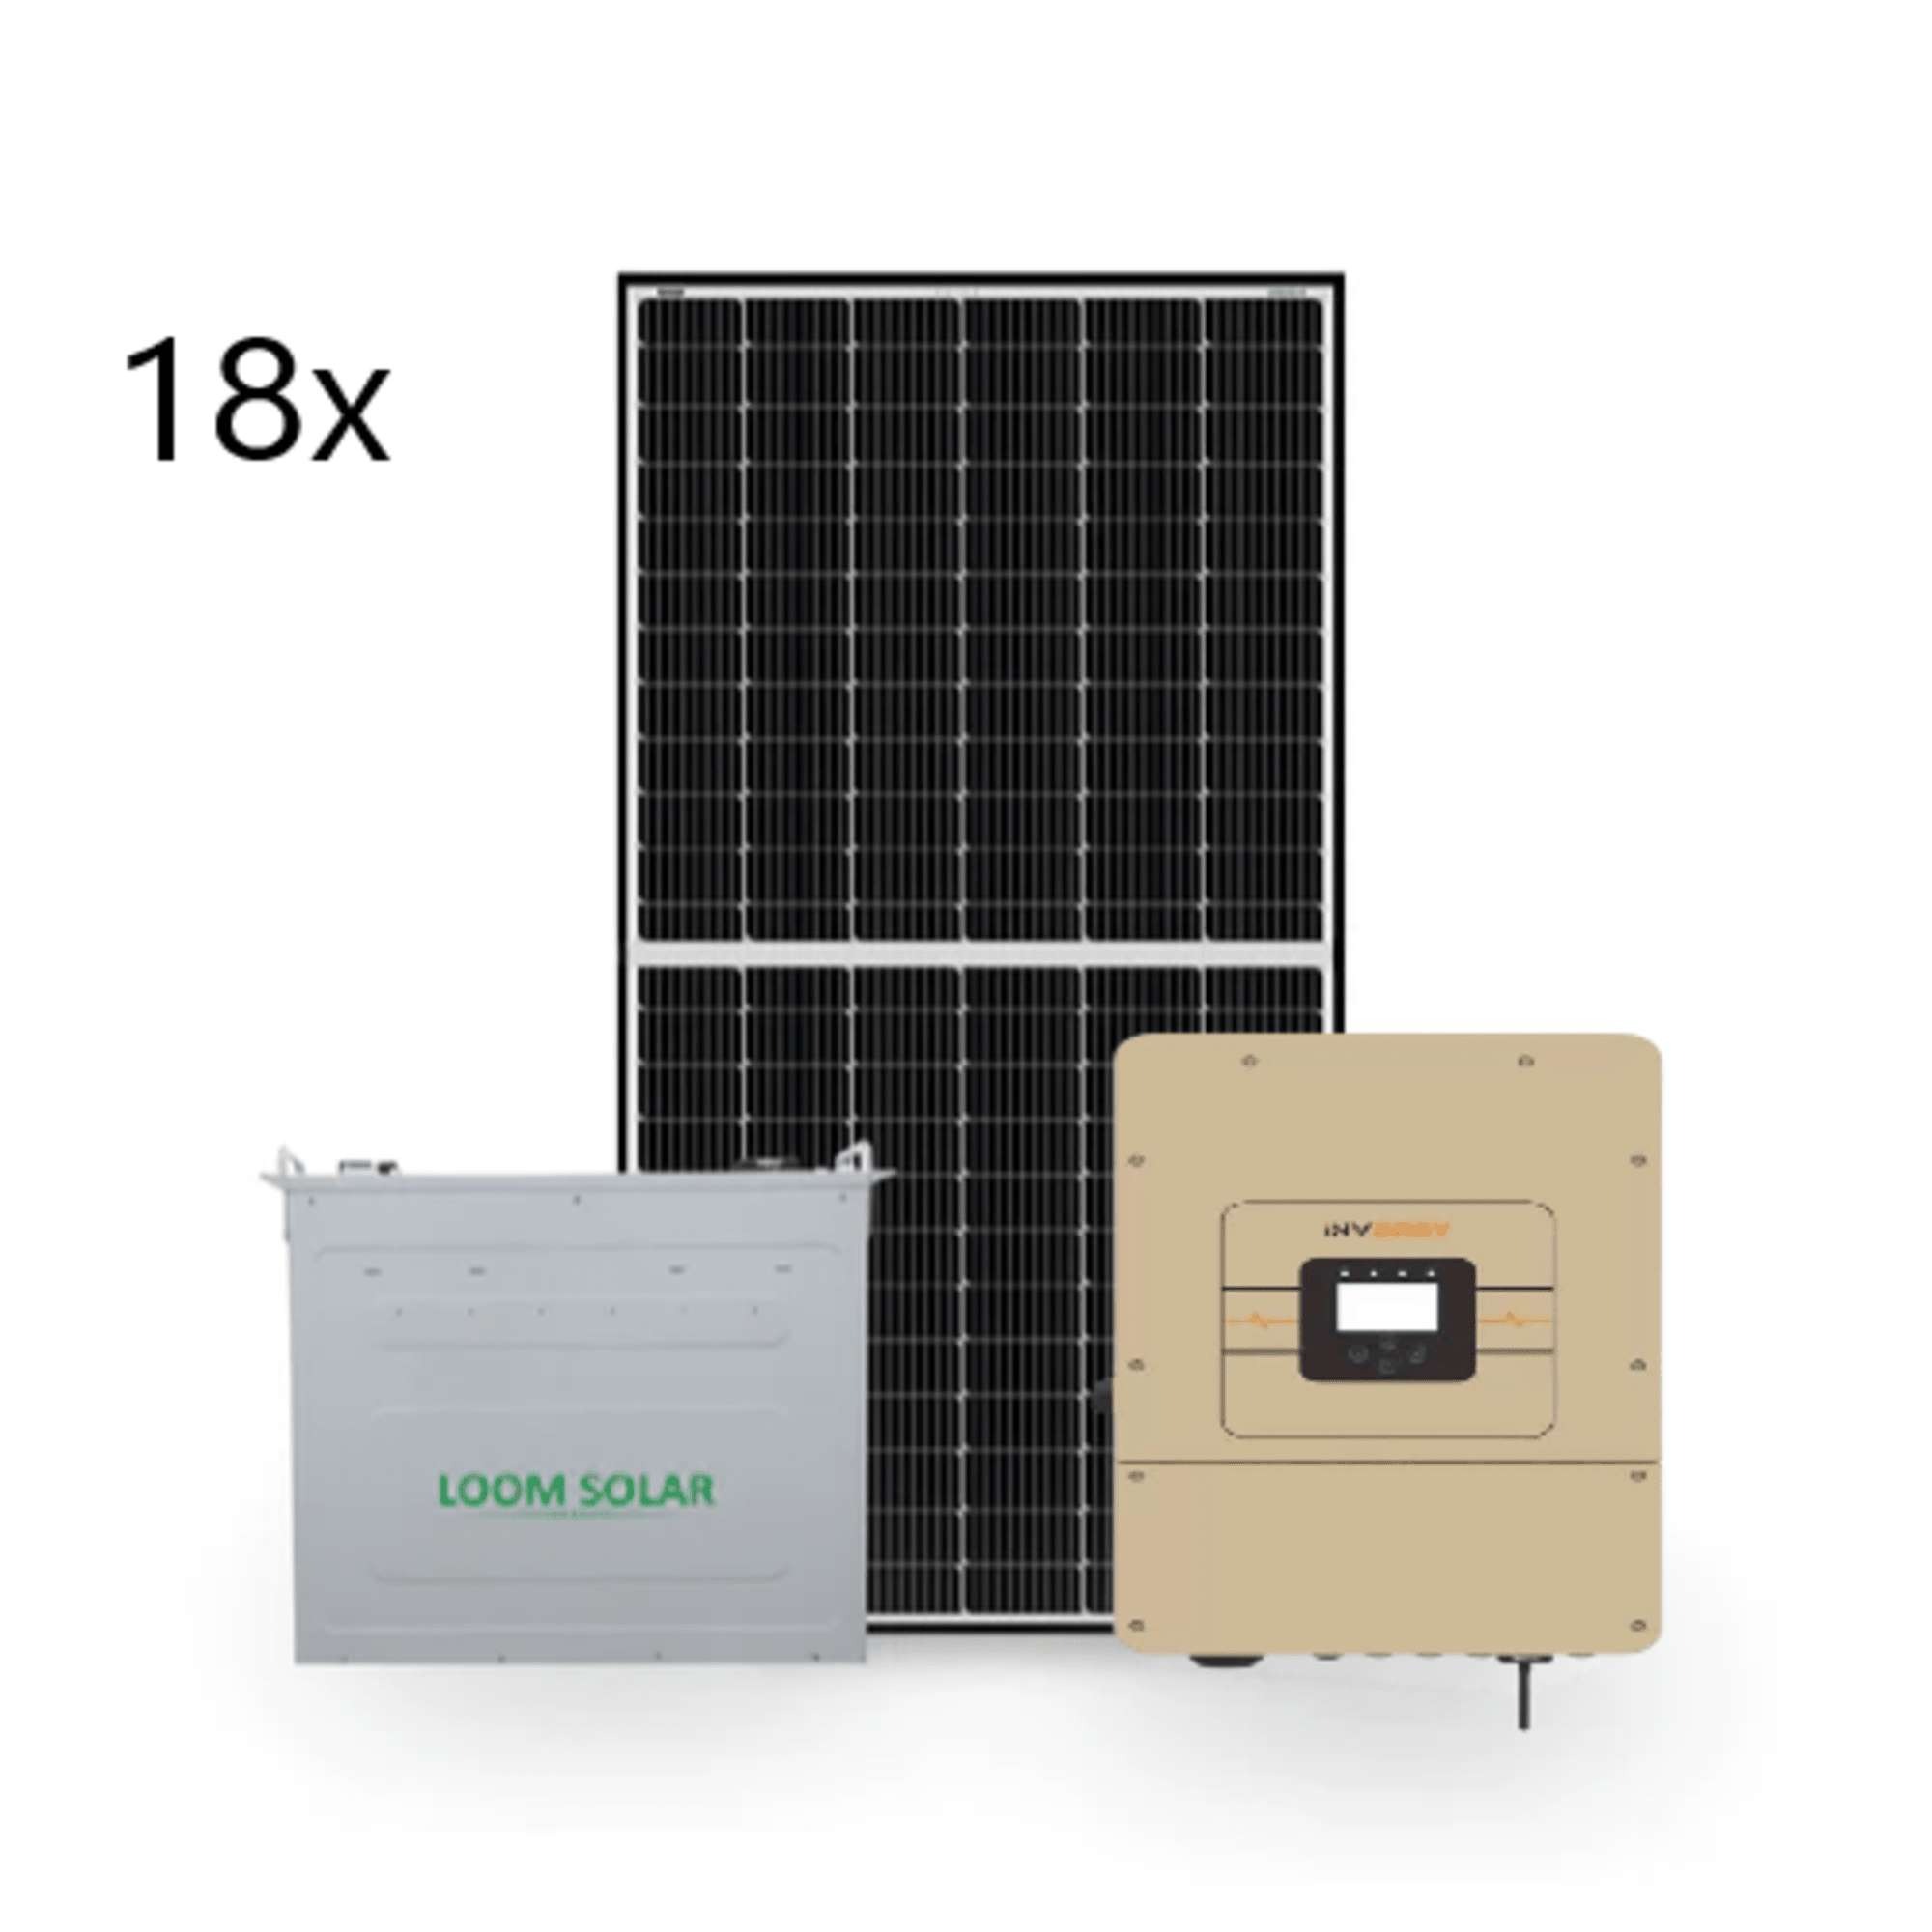 10kW Hybrid Solar System for Homes, Small Office, Shops